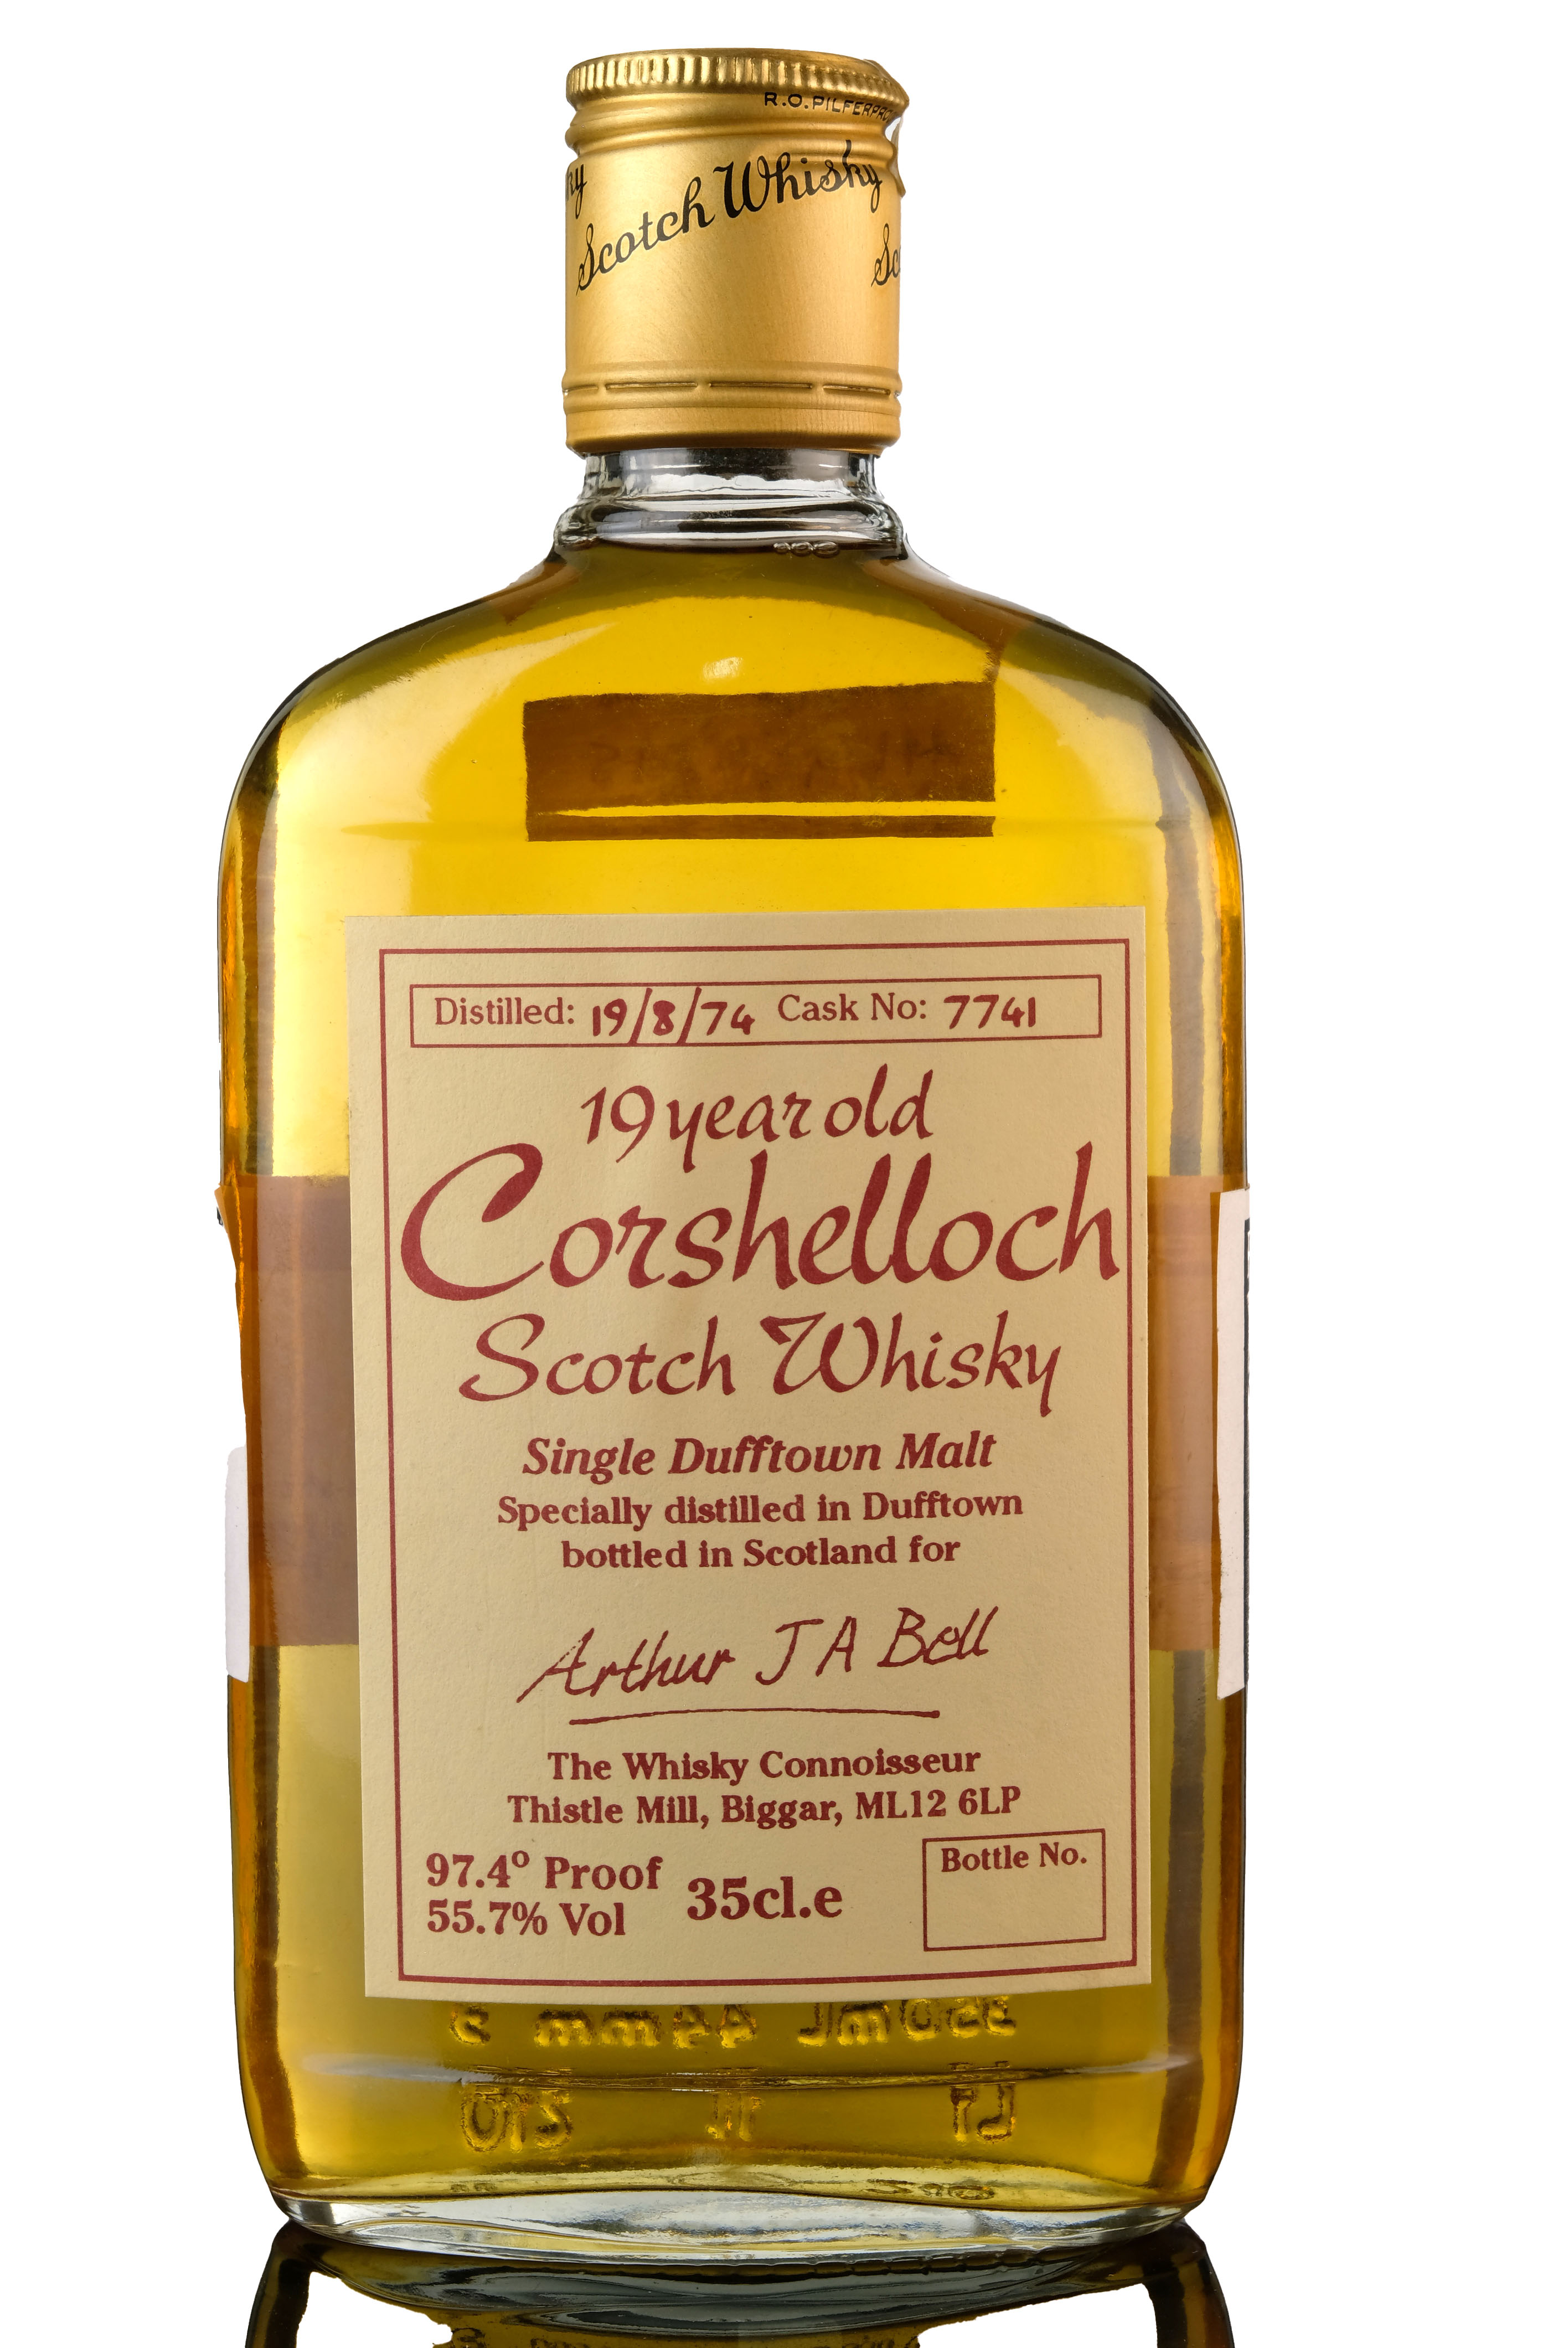 Corshelloch (Dufftown) 1974 - 19 Year Old - The Whisky Connoisseur - Single Cask 7741 - Ha